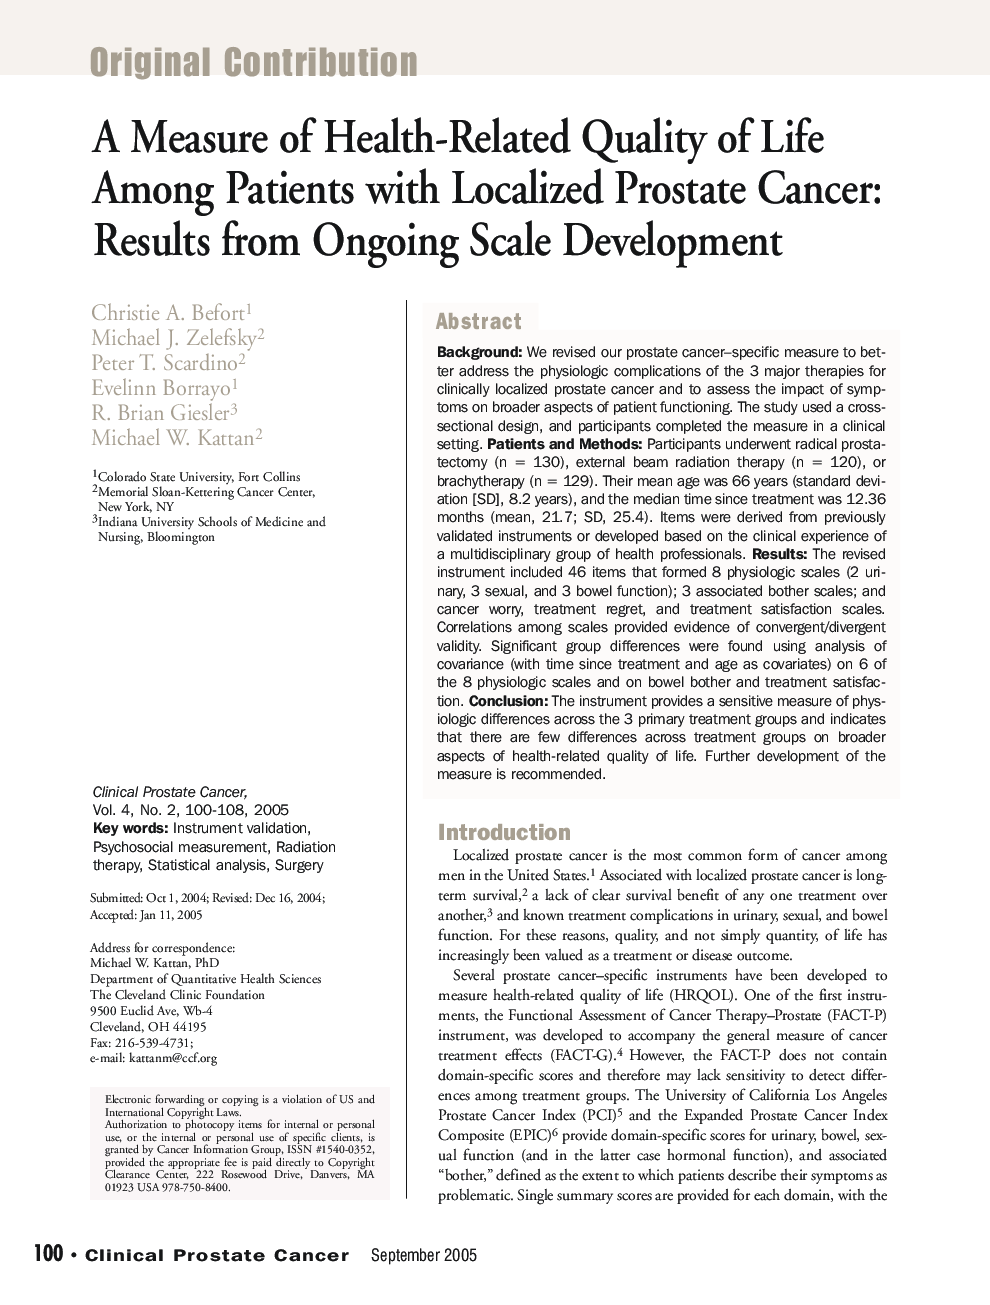 A Measure of Health-Related Quality of Life Among Patients with Localized Prostate Cancer: Results from Ongoing Scale Development